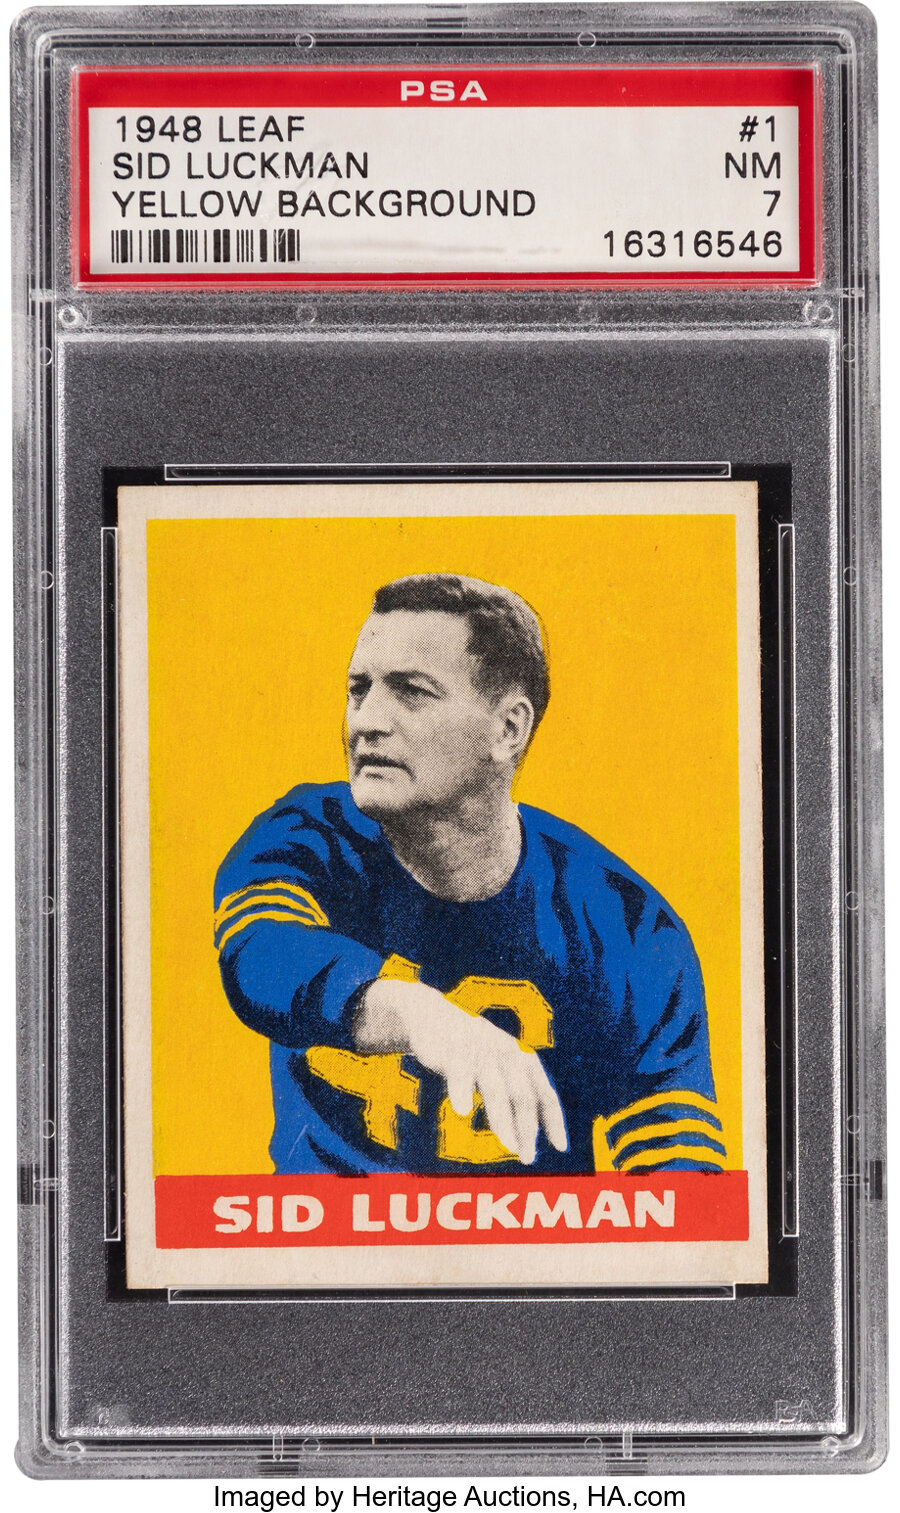 1948 Leaf Sid Luckman (Yellow Background) Rookie #1 PSA NM 7